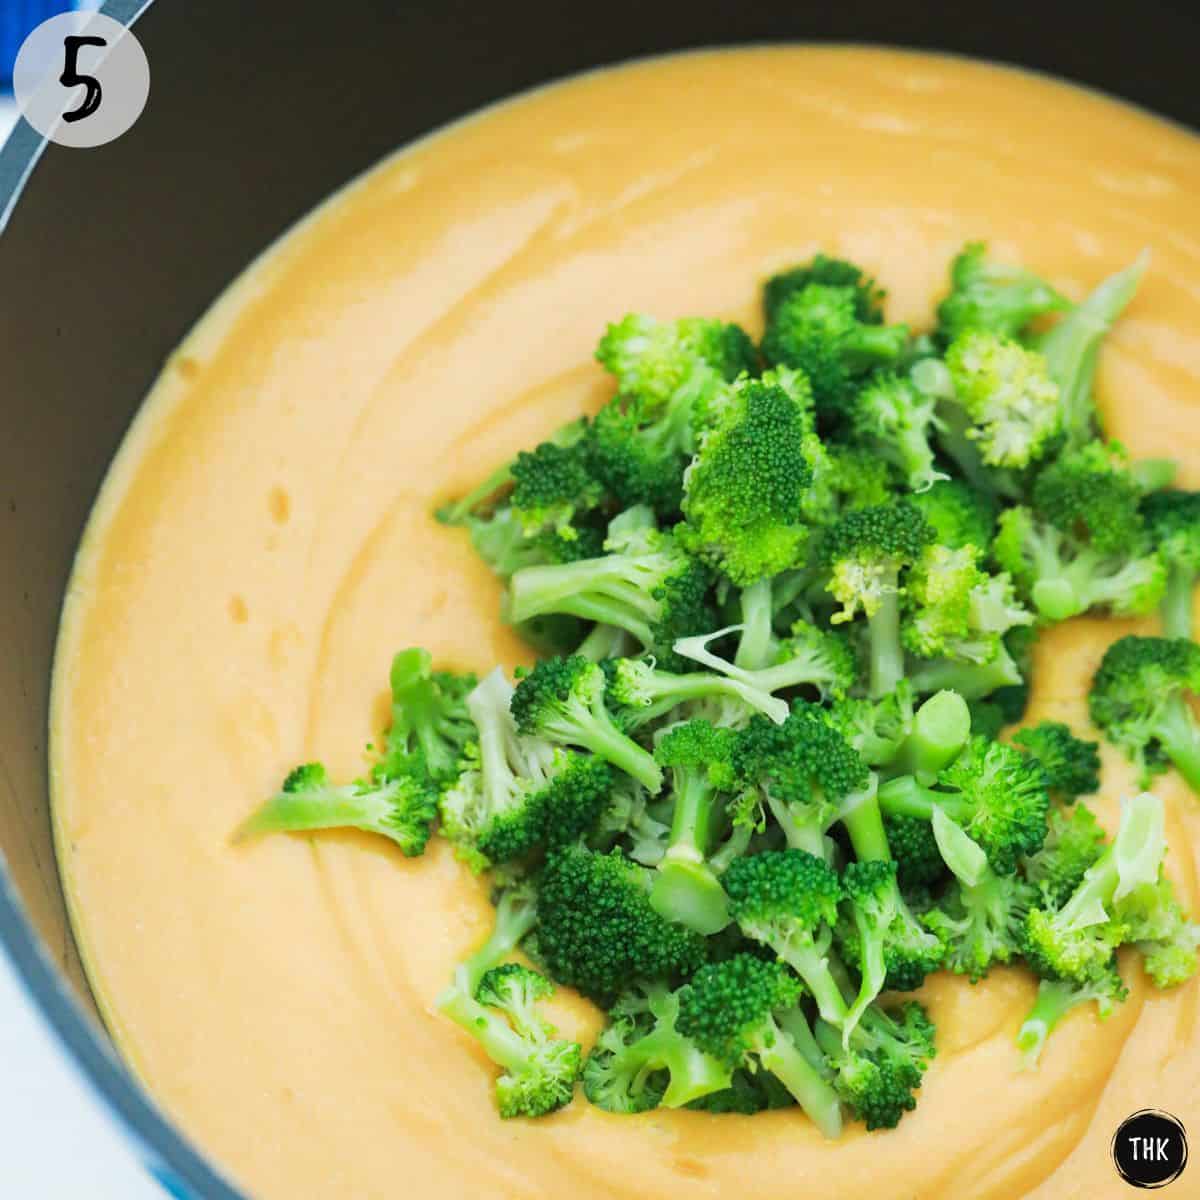 Cheesy orange soup in pot with broccoli florets on top.